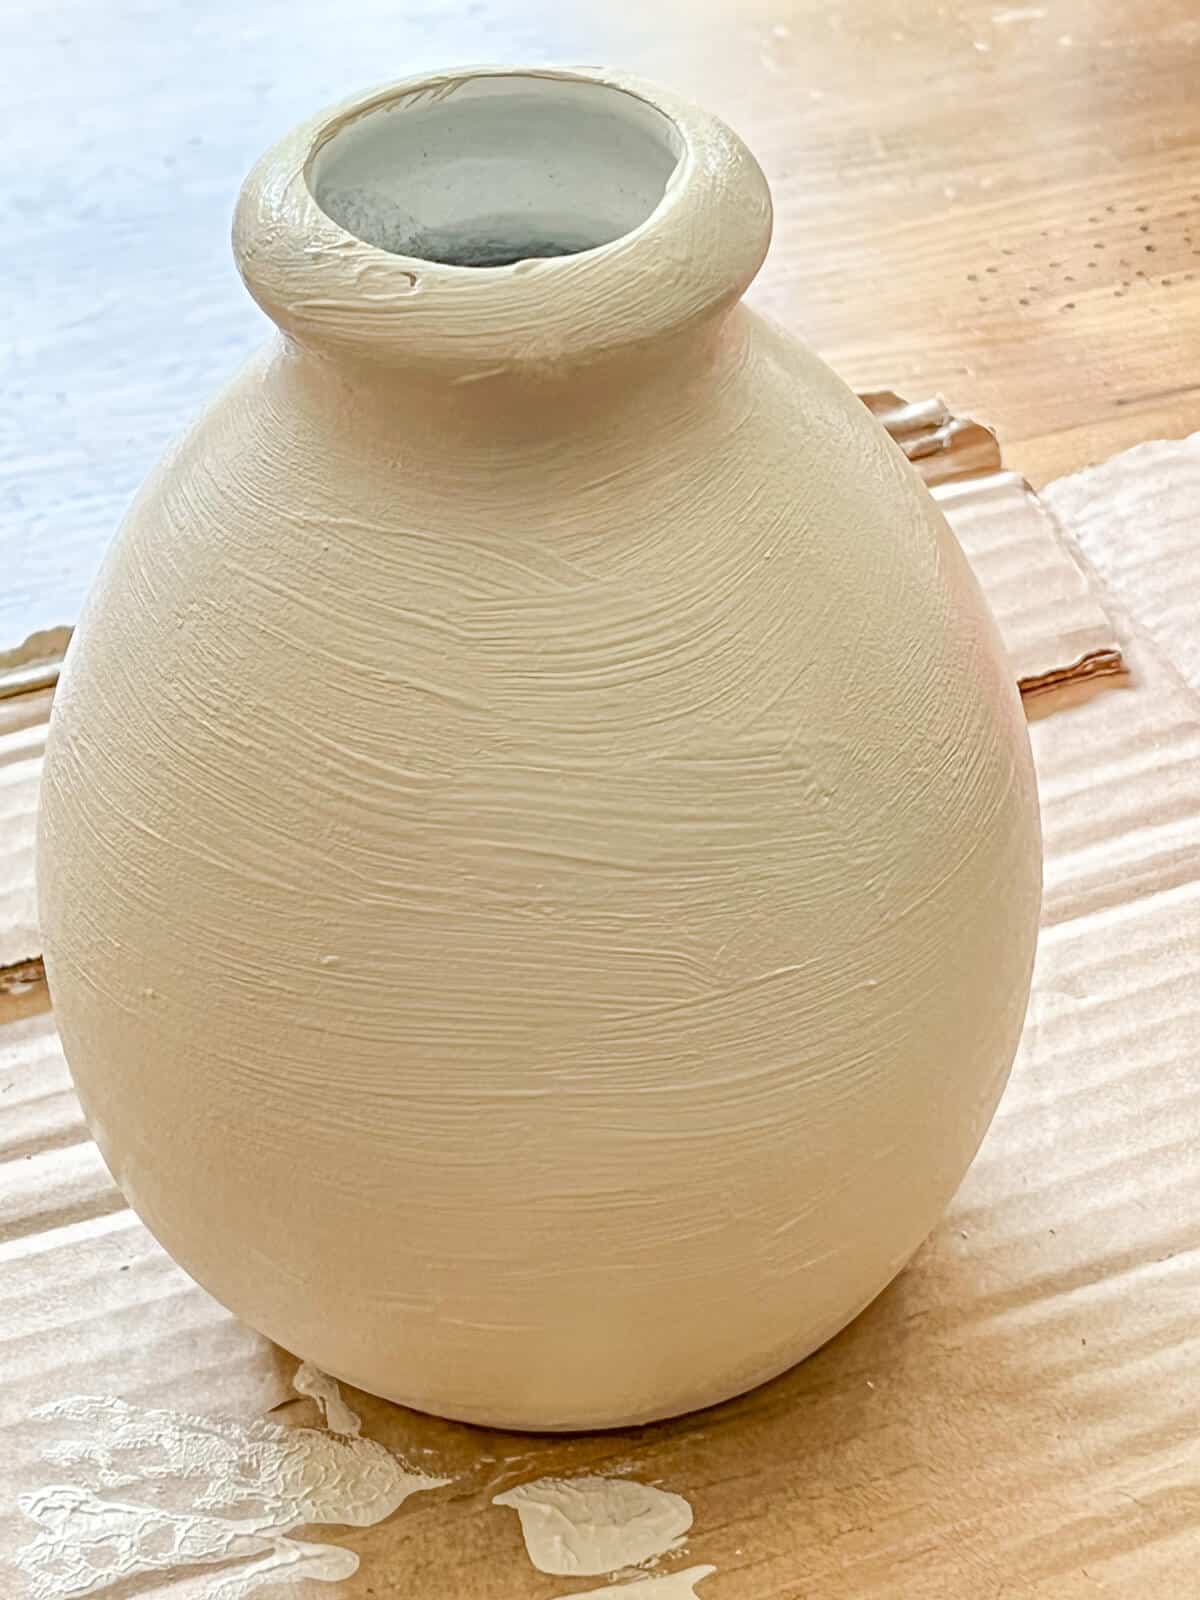 painting a ceramic jar with textured baking soda paint